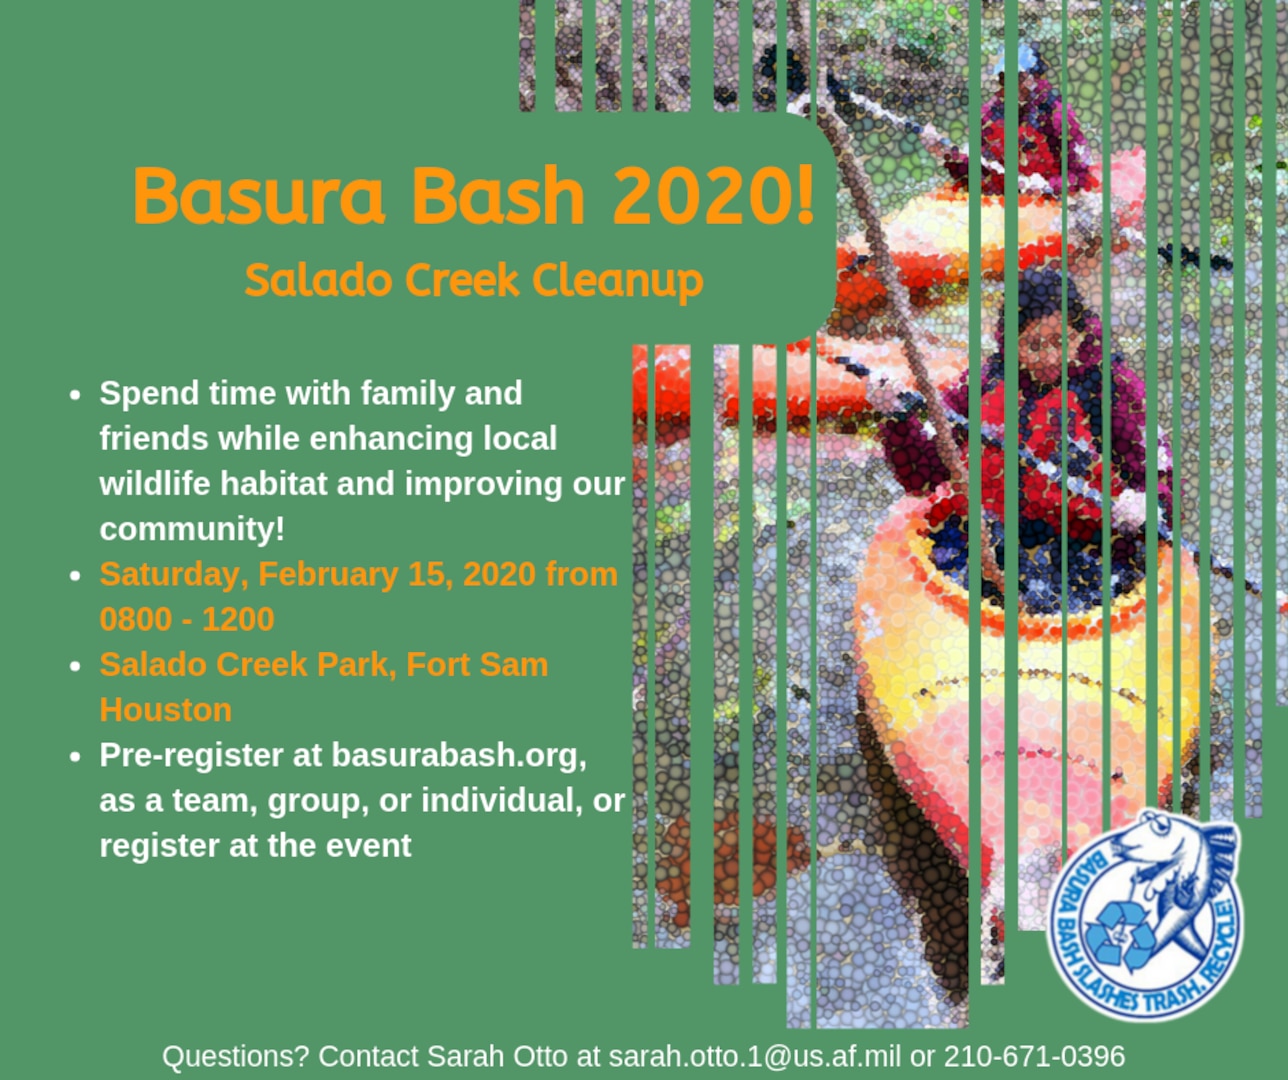 For more information on the event, go to http://www.basurabash.org/ or call 210-671-0396. For more information on how to keep our storm drains clean for downstream, call 210-652-3314.